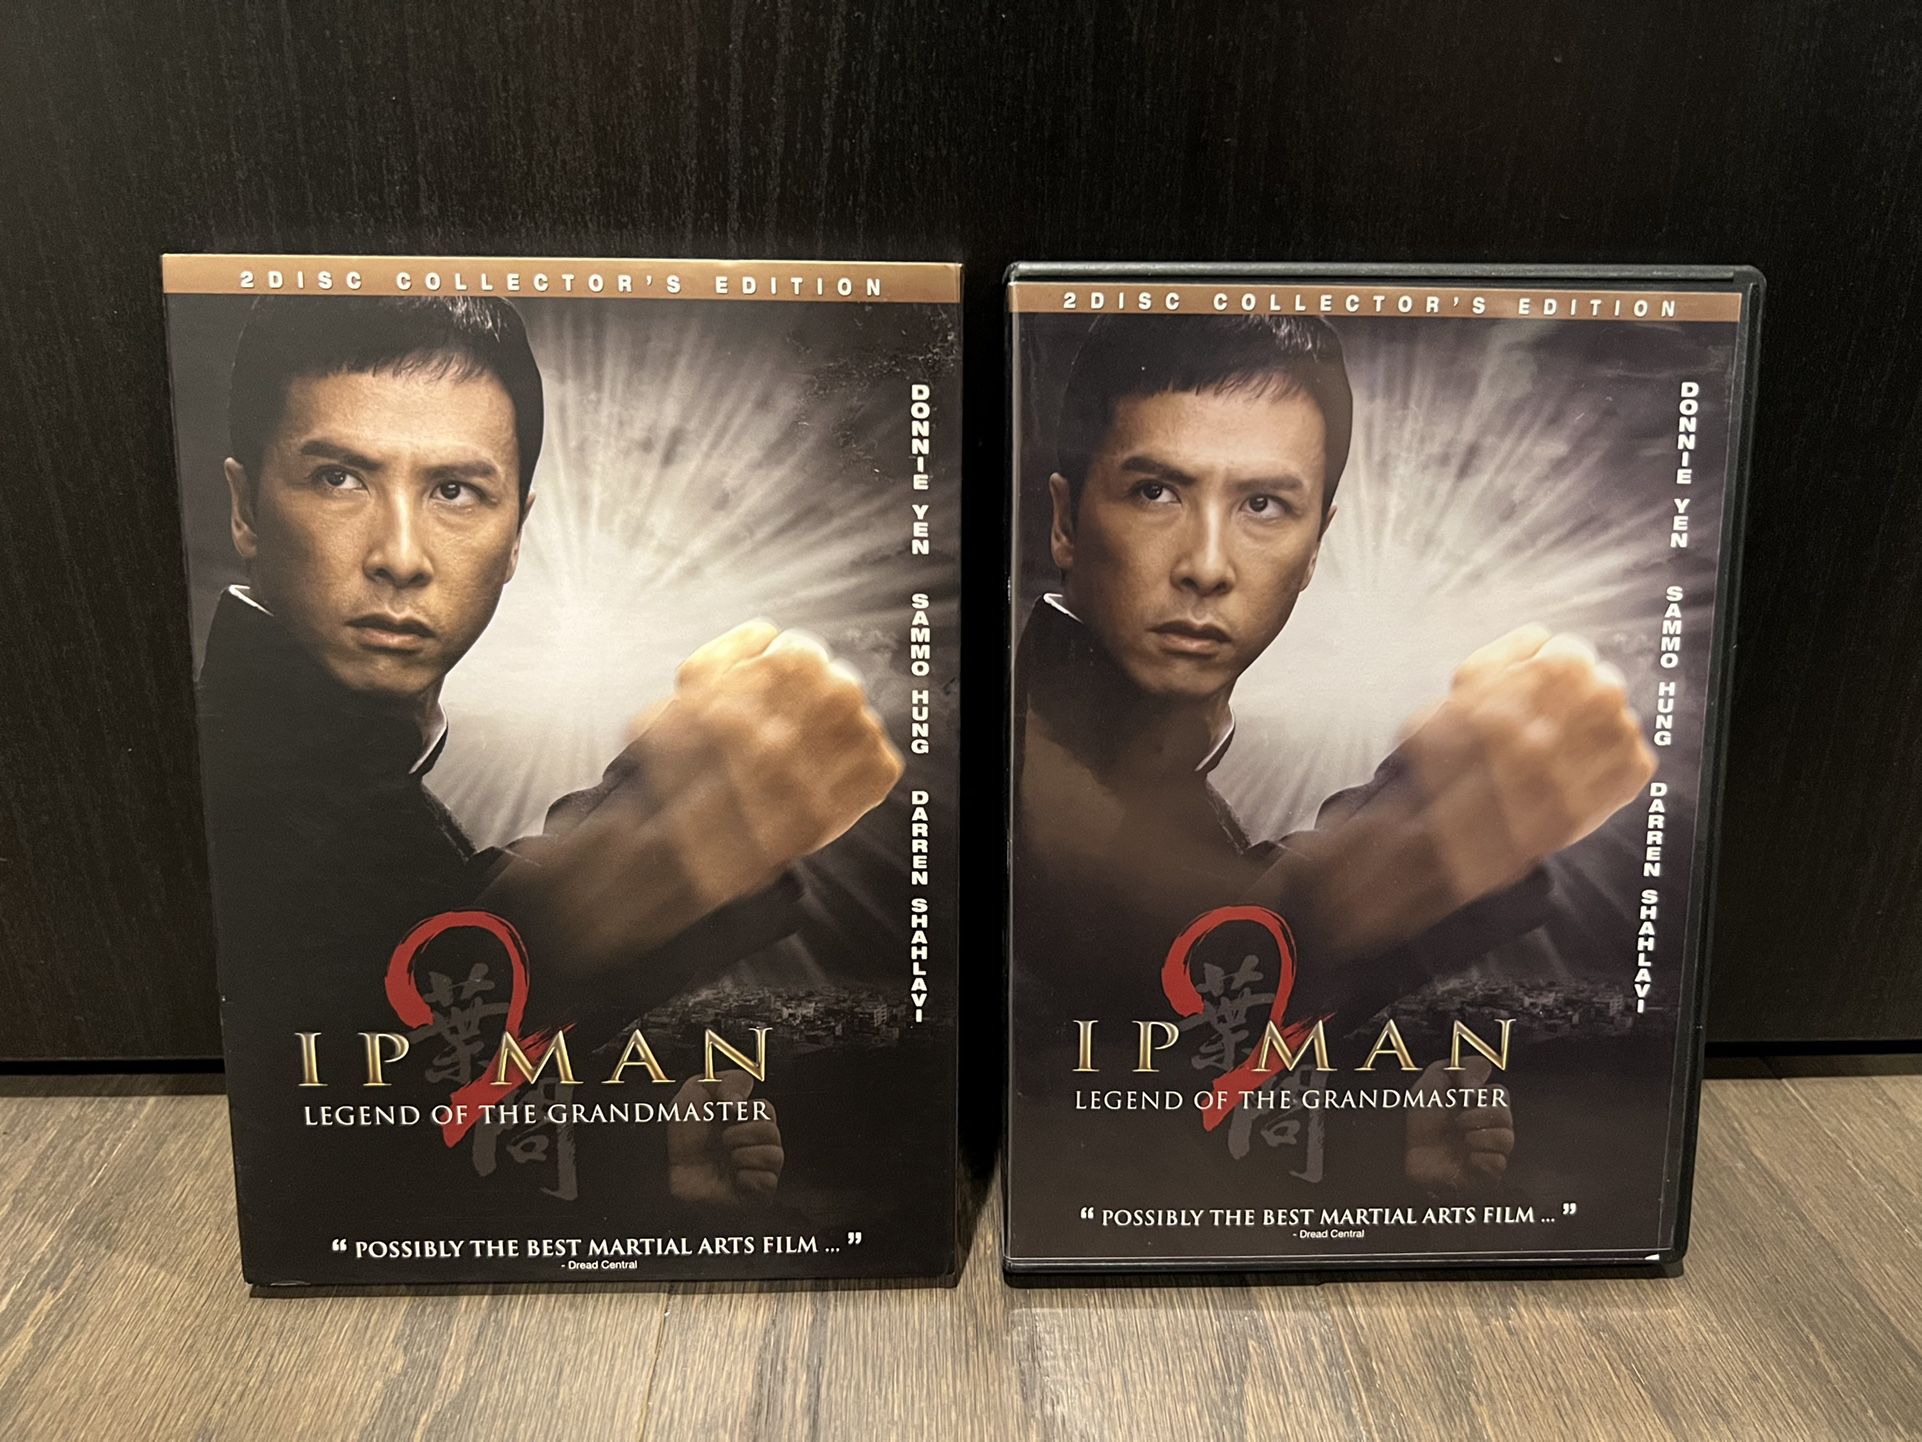 Ip Man 2: 2 Disc Collectors Edition Movie DVD with Case and Slipcover NO MEETUPS